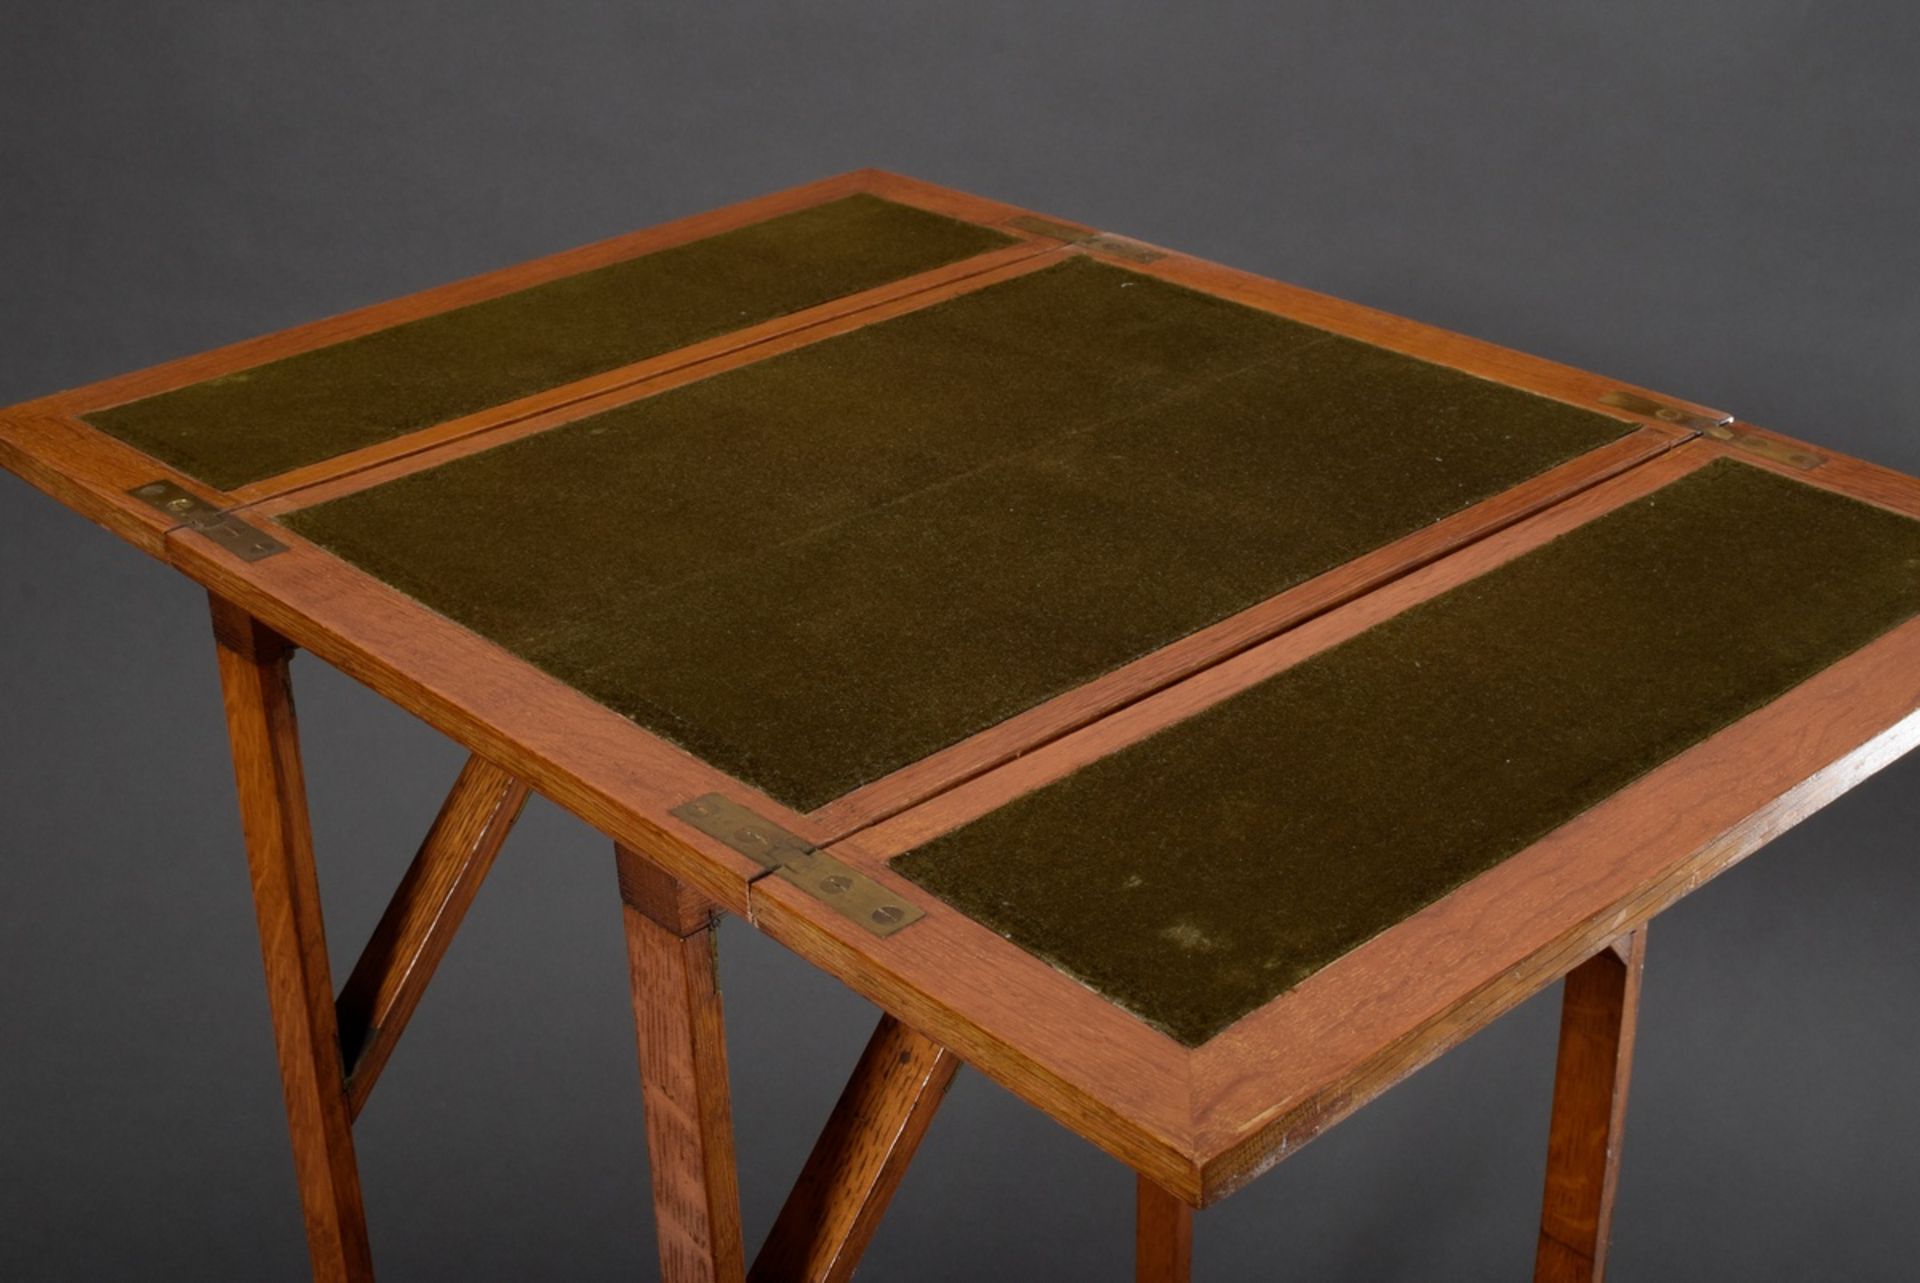 Travel patent table with green felt tops and two drawers, wood, foldable, num. "Patent Nr. 14097",  - Image 3 of 10